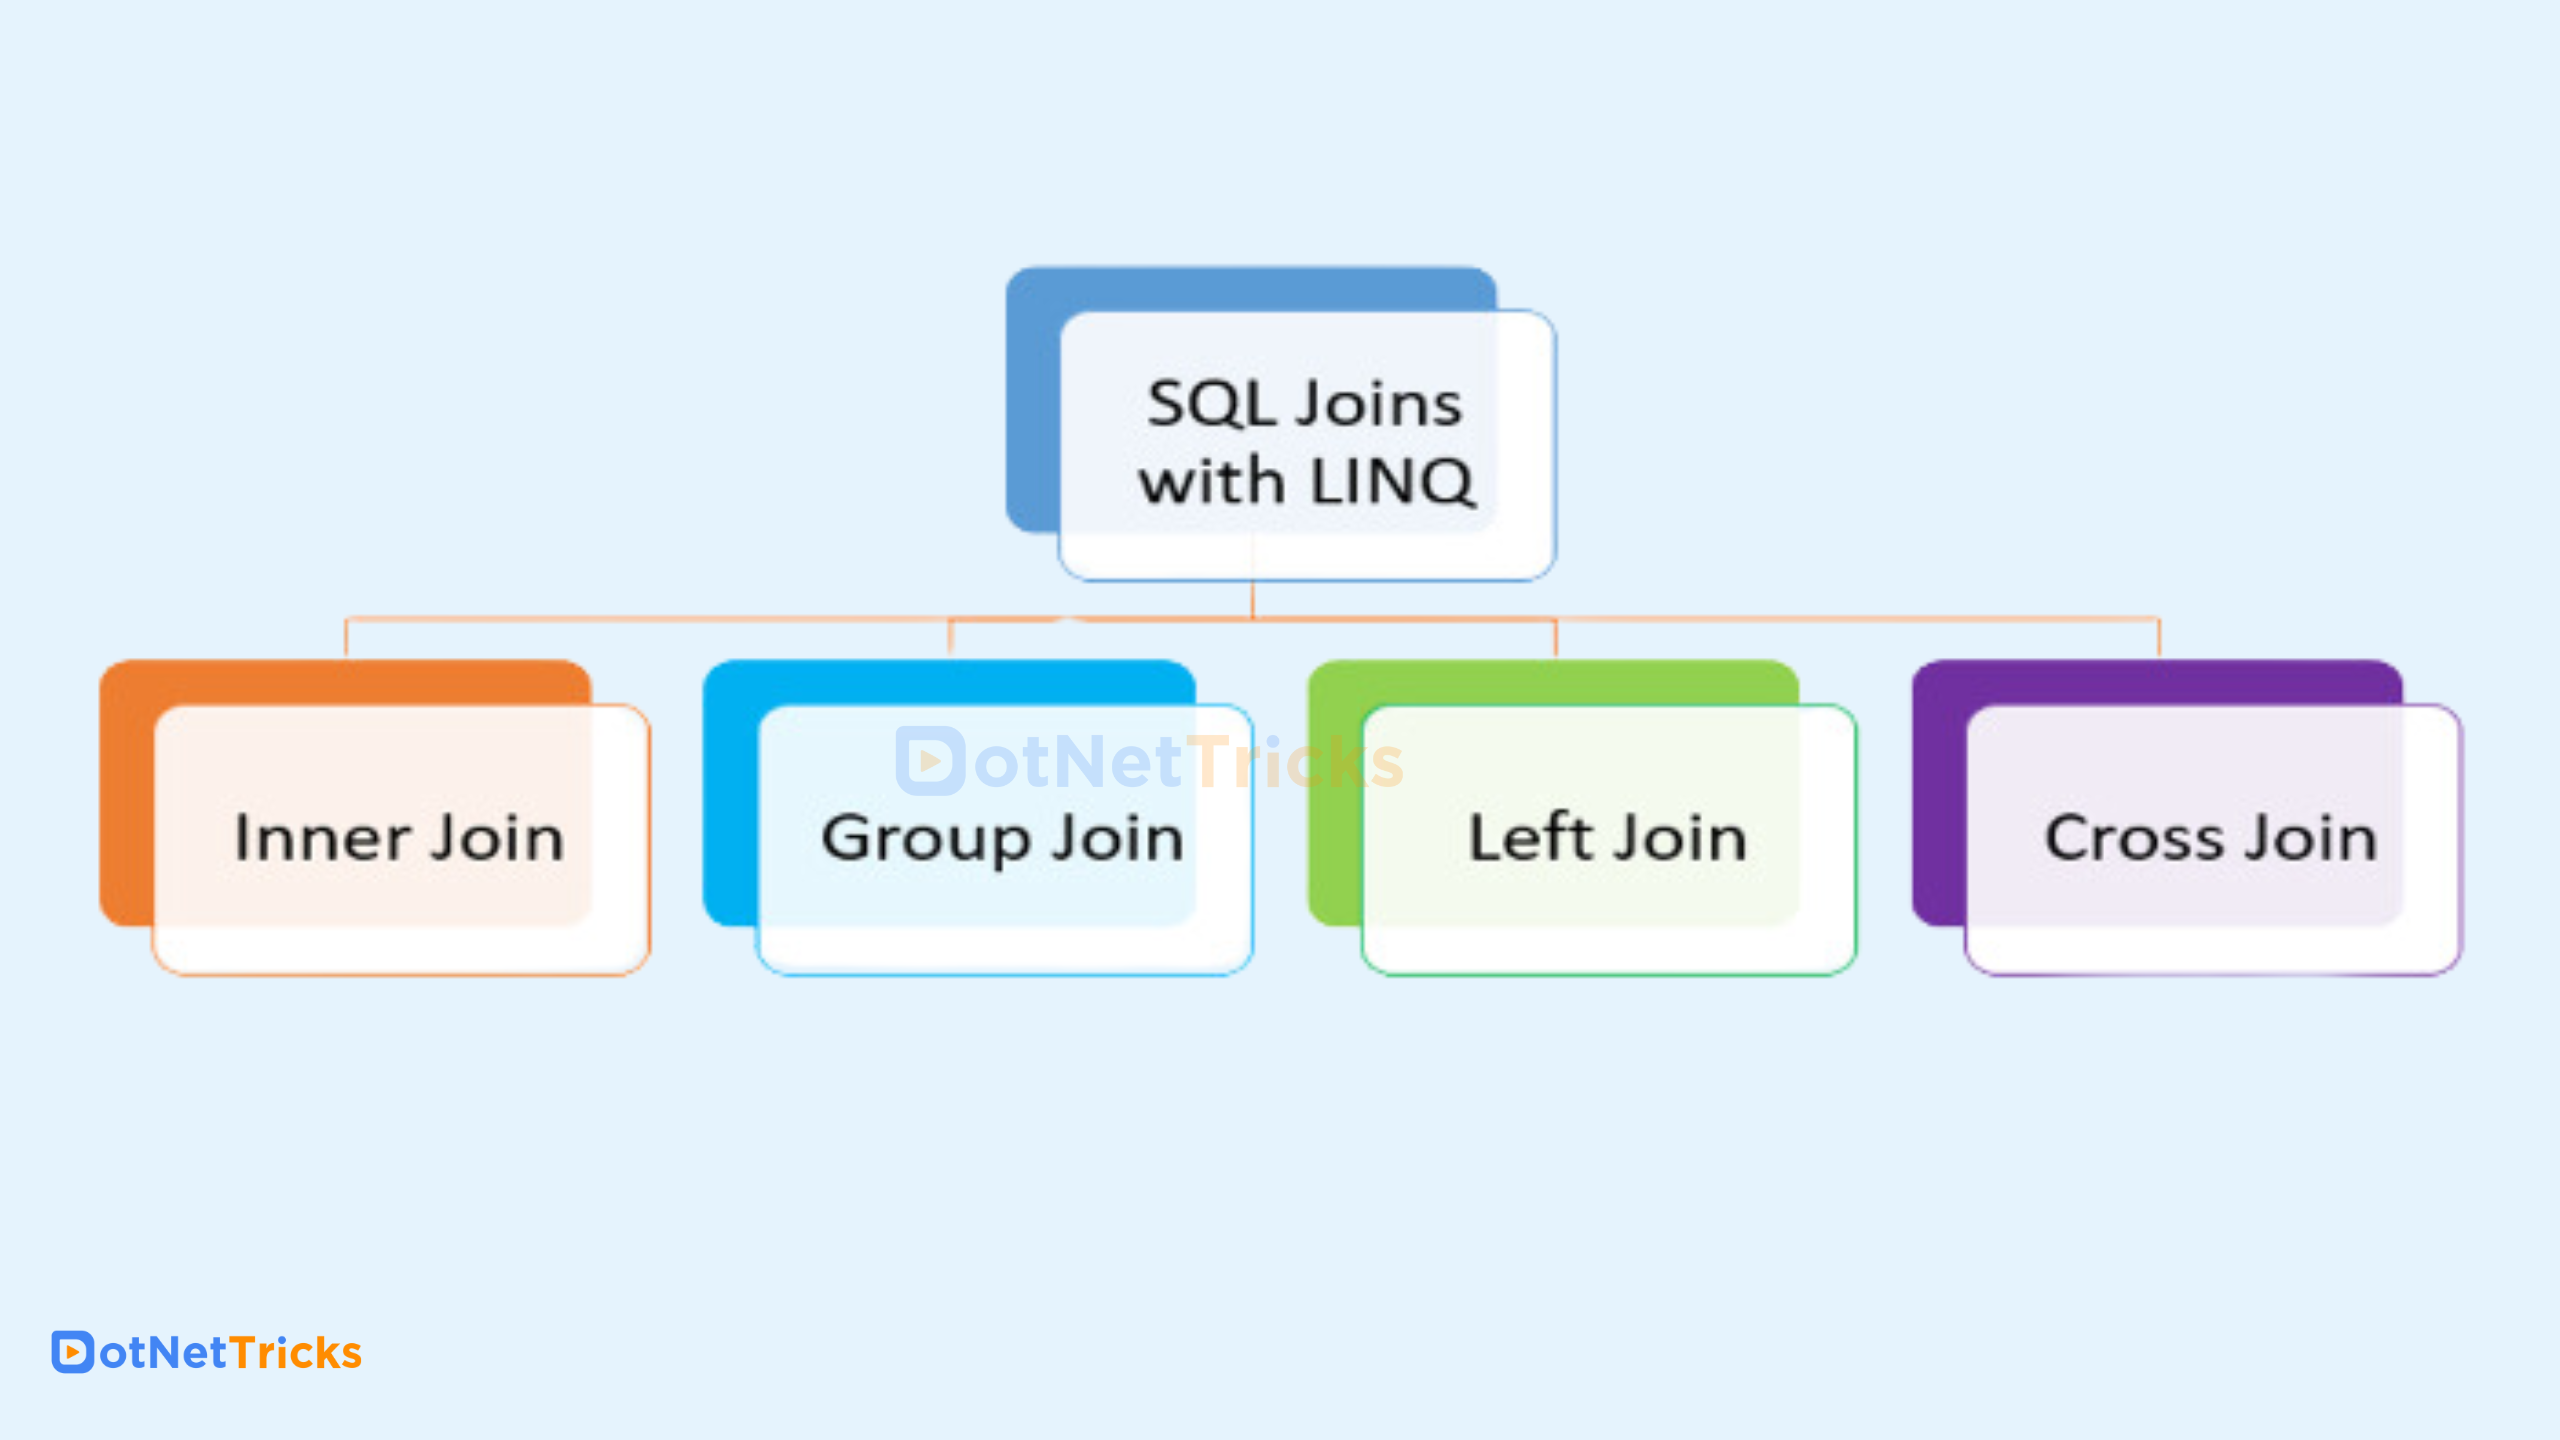 Types of LINQ Joins